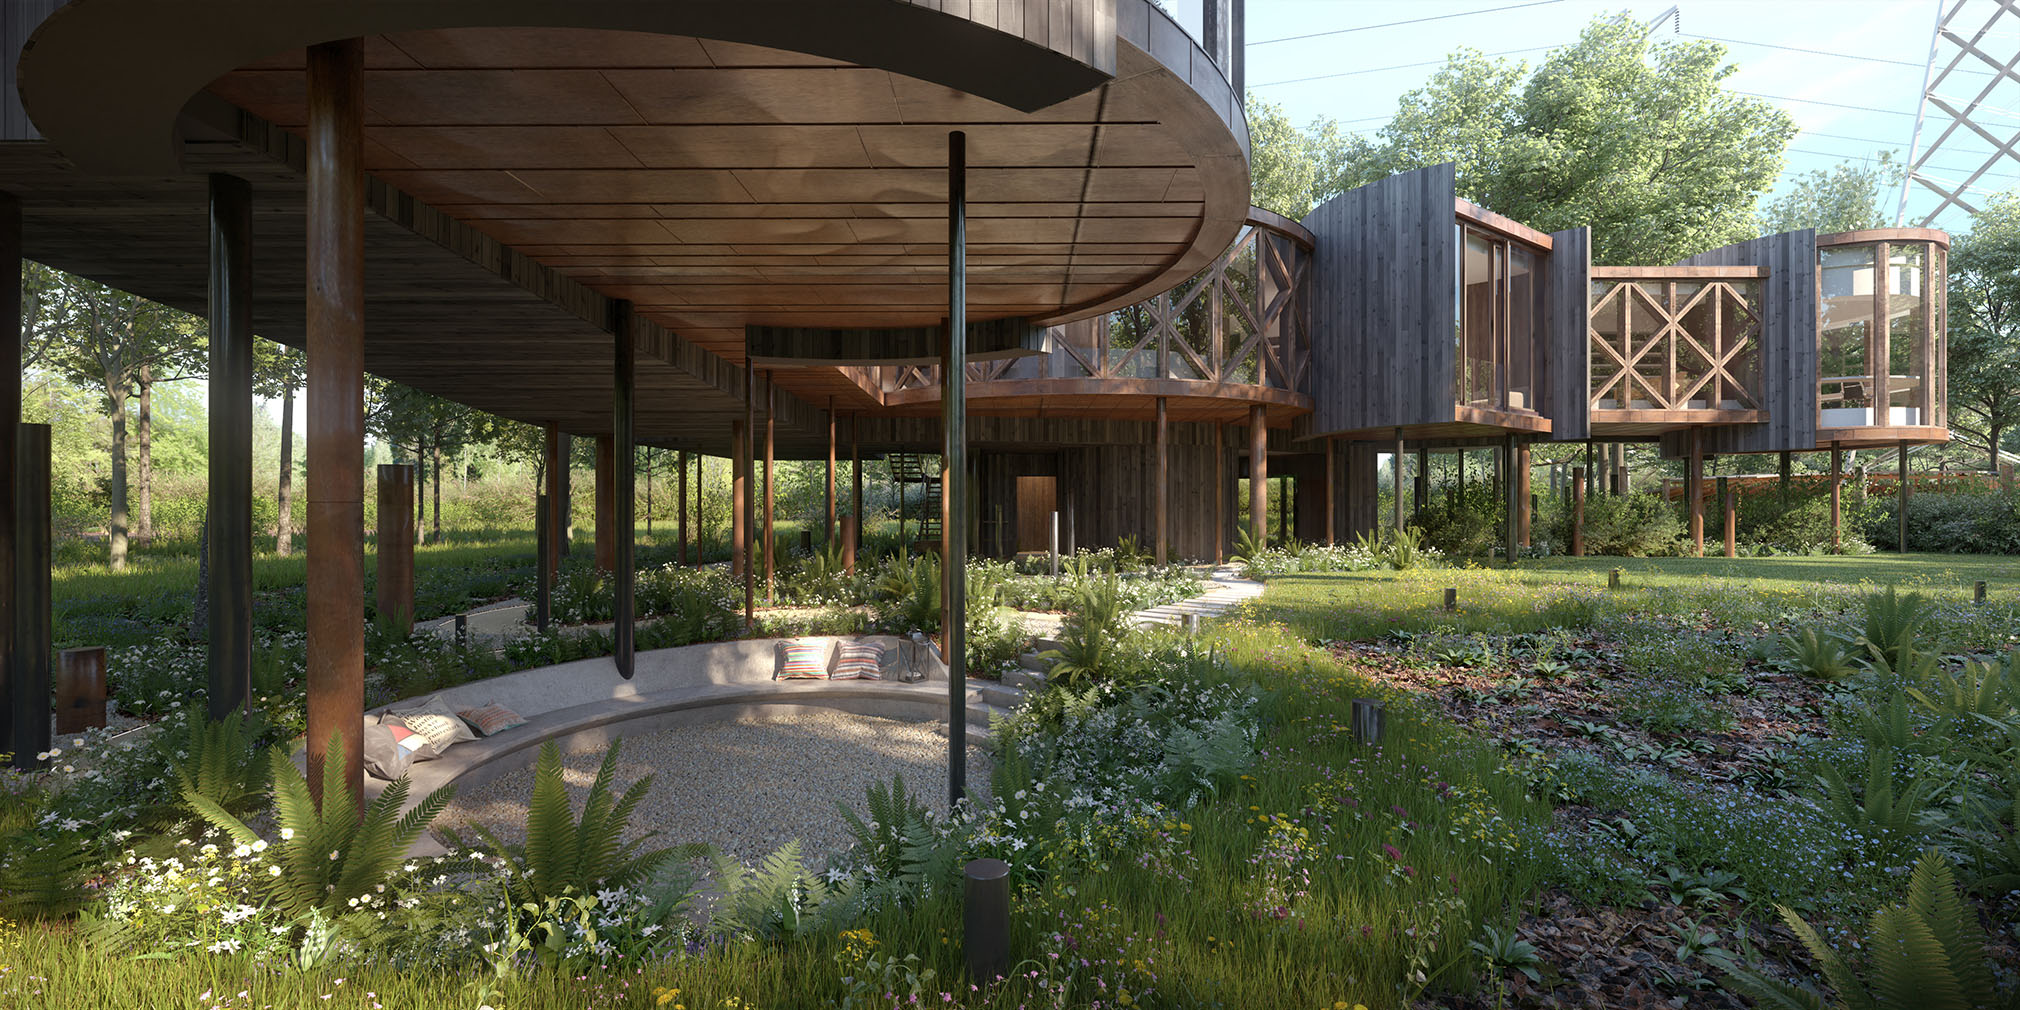 Exterior visualisation of unbuilt treehouse home with planning permission hits the market in Ewes, Gloucestershire